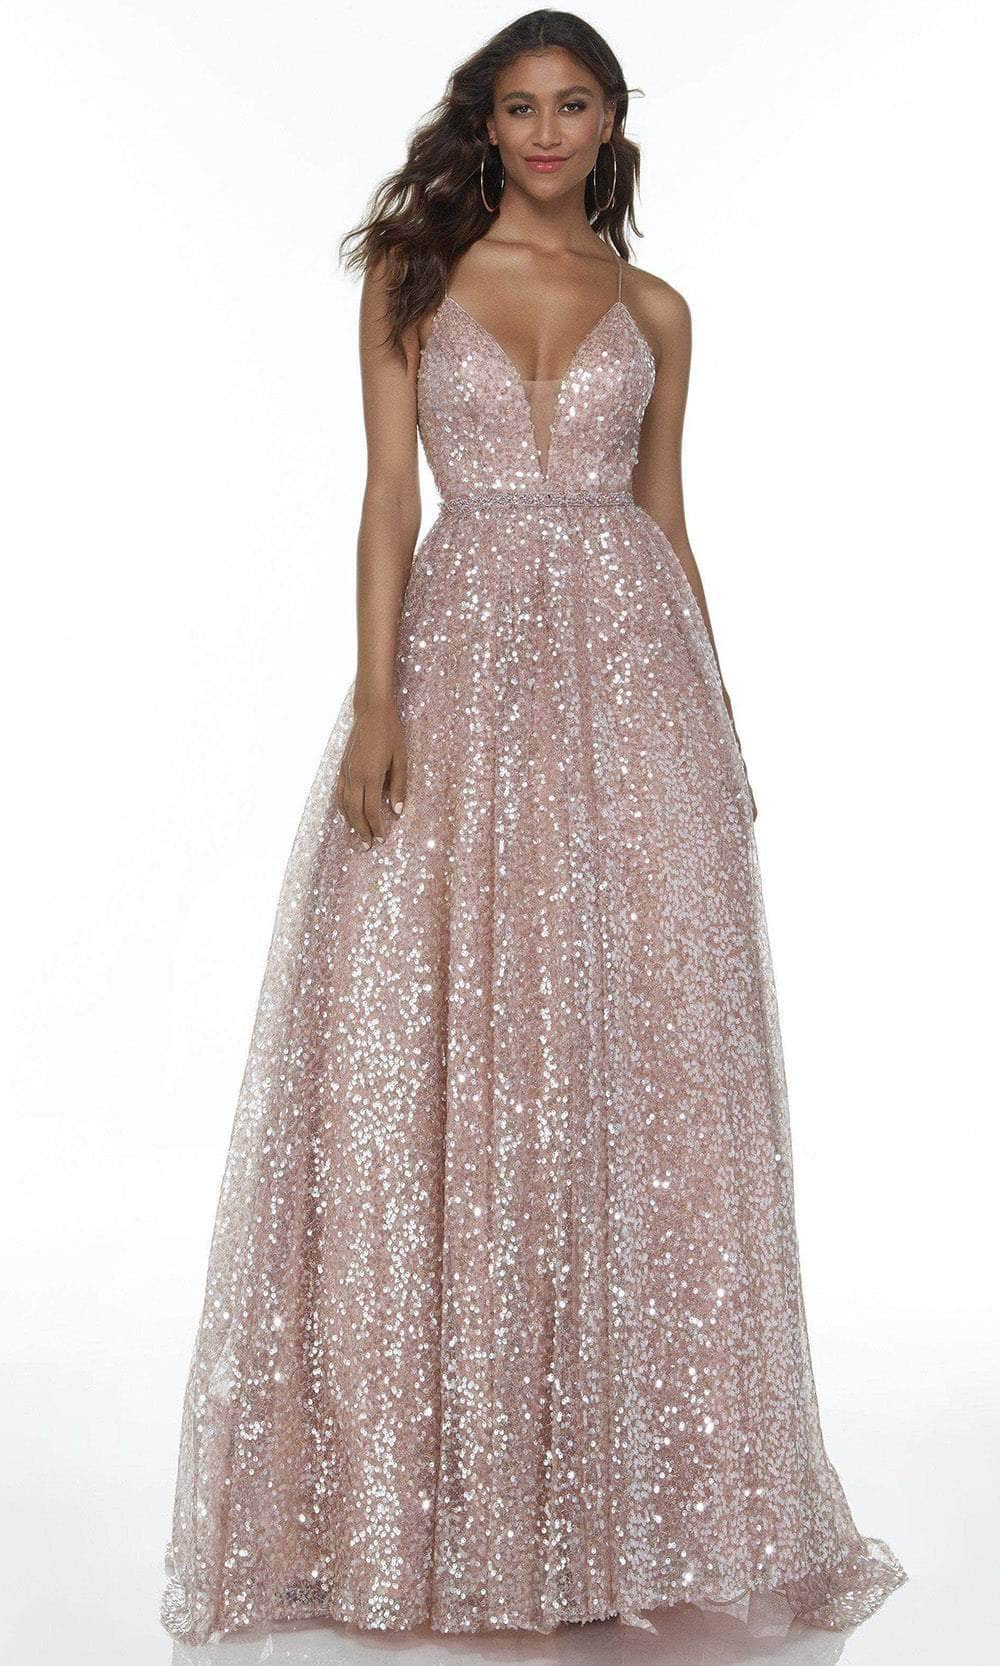 Alyce Paris 61068 - Sparkling Sequined Ballgown Special Occasion Dress 000 / Rose Gold